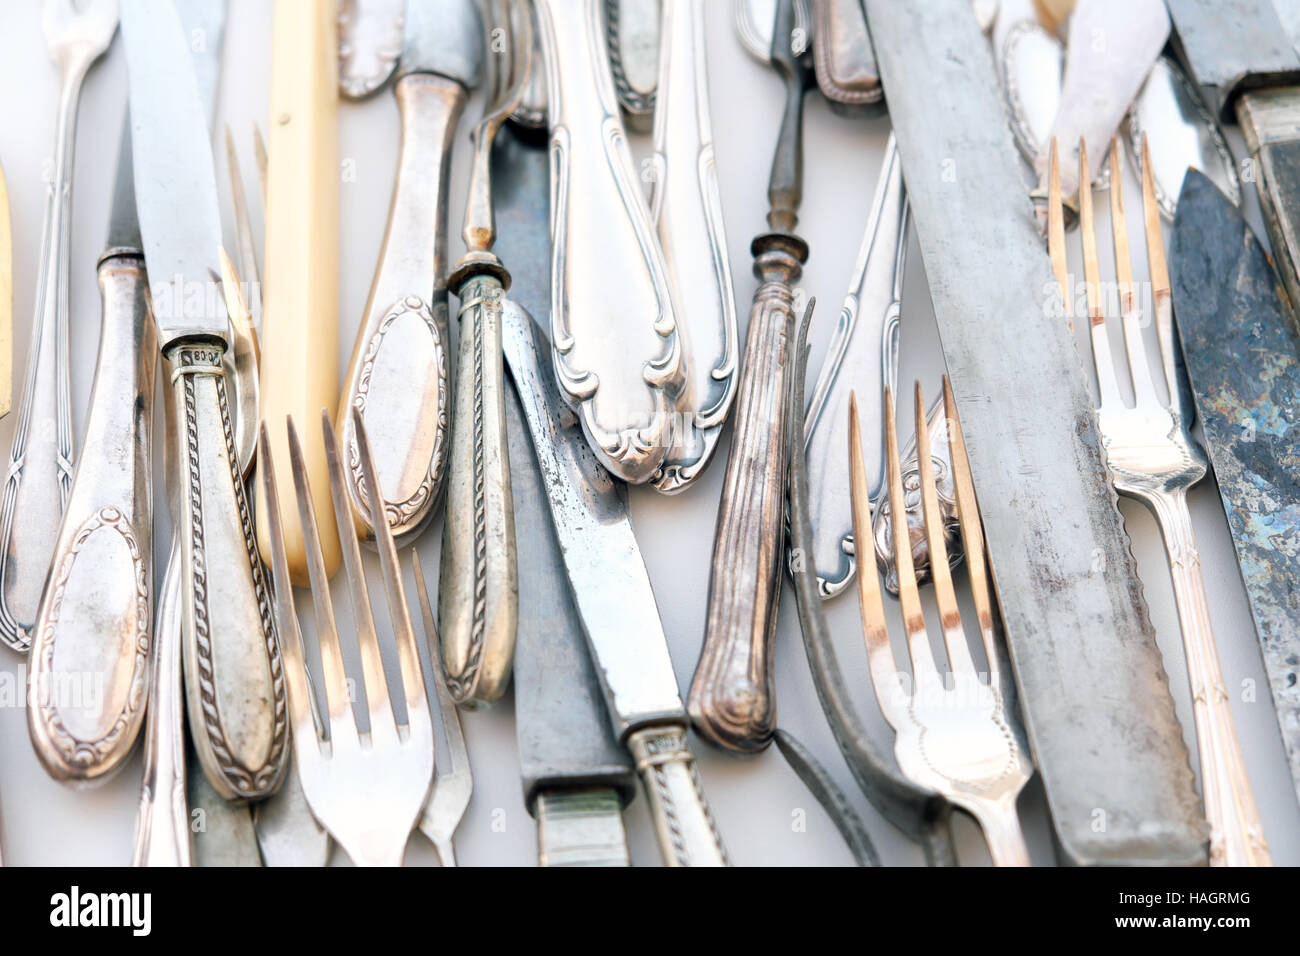 old cutlery, vintage flatware, beautiful silver fork and knife Stock Photo